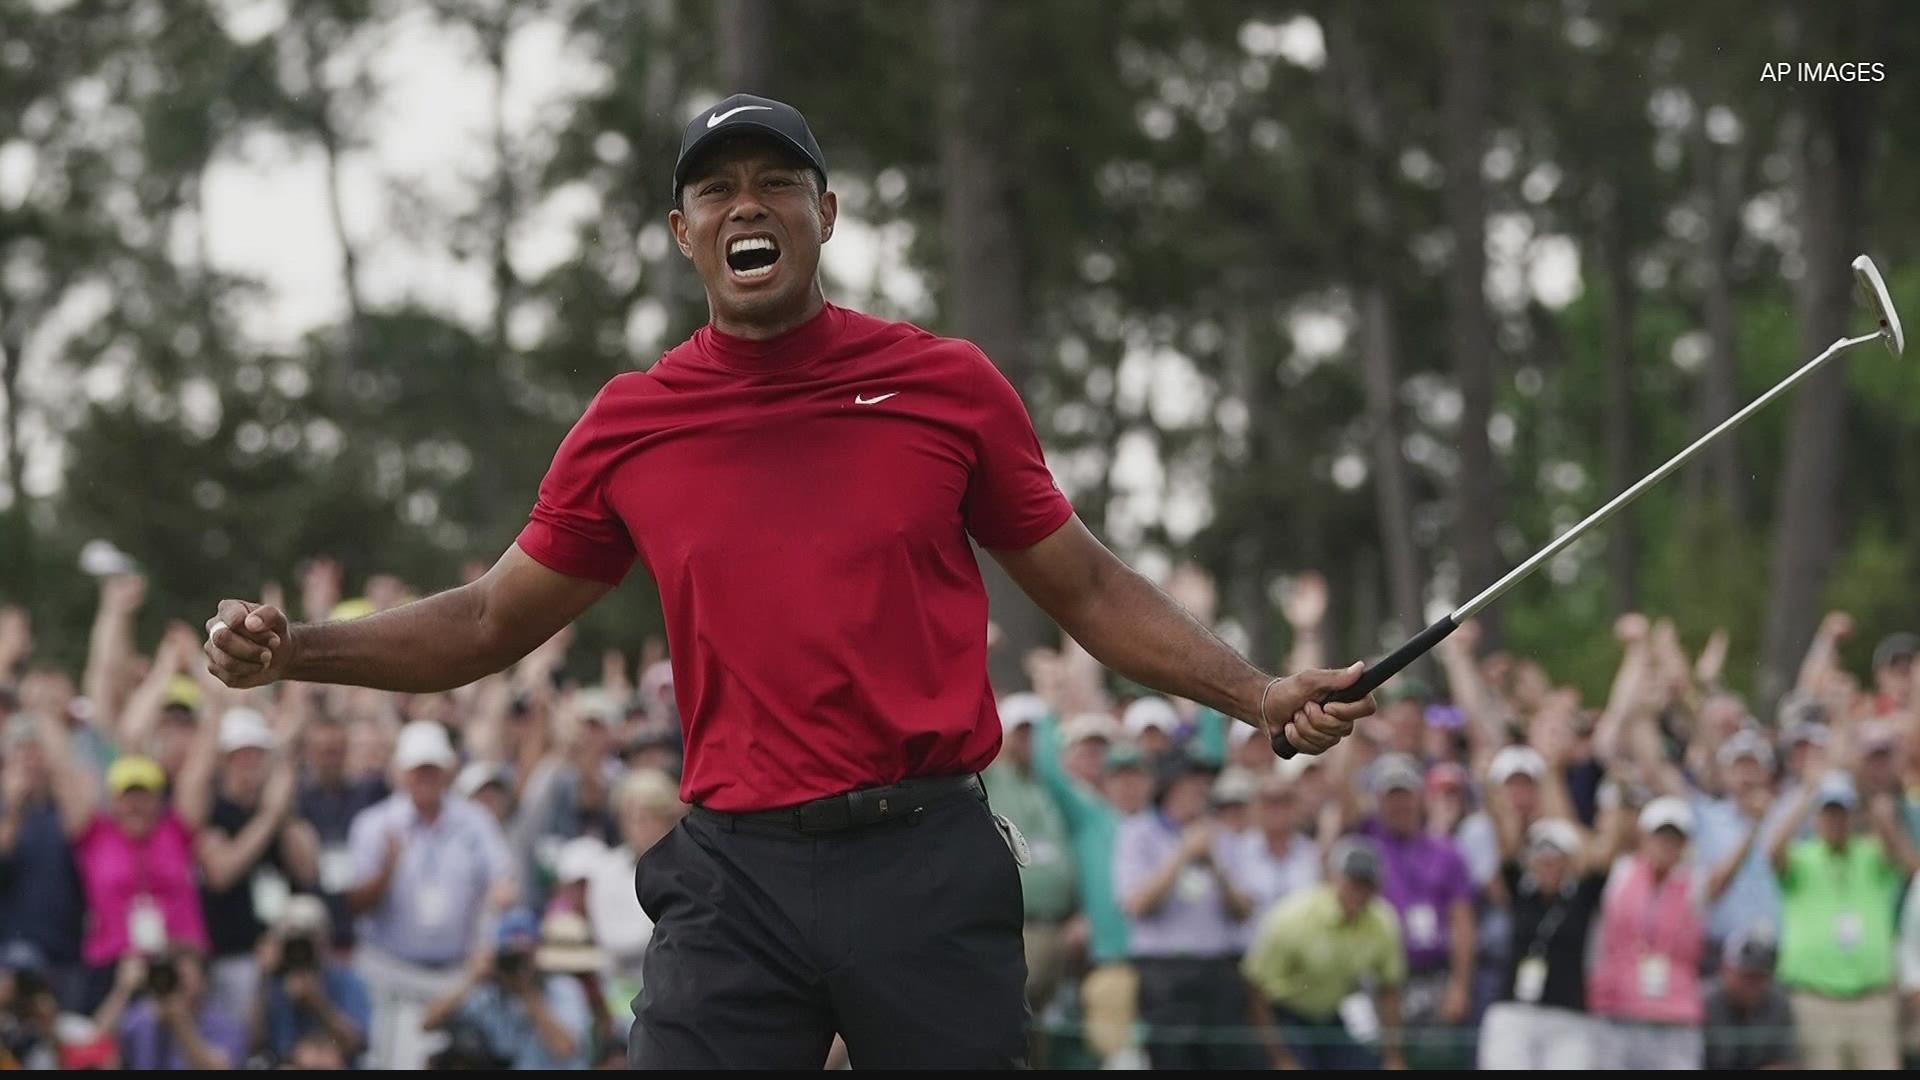 In Augusta, there were huge crowds as Tiger Woods walked the course as we all wait to see if he will play in the tournament.